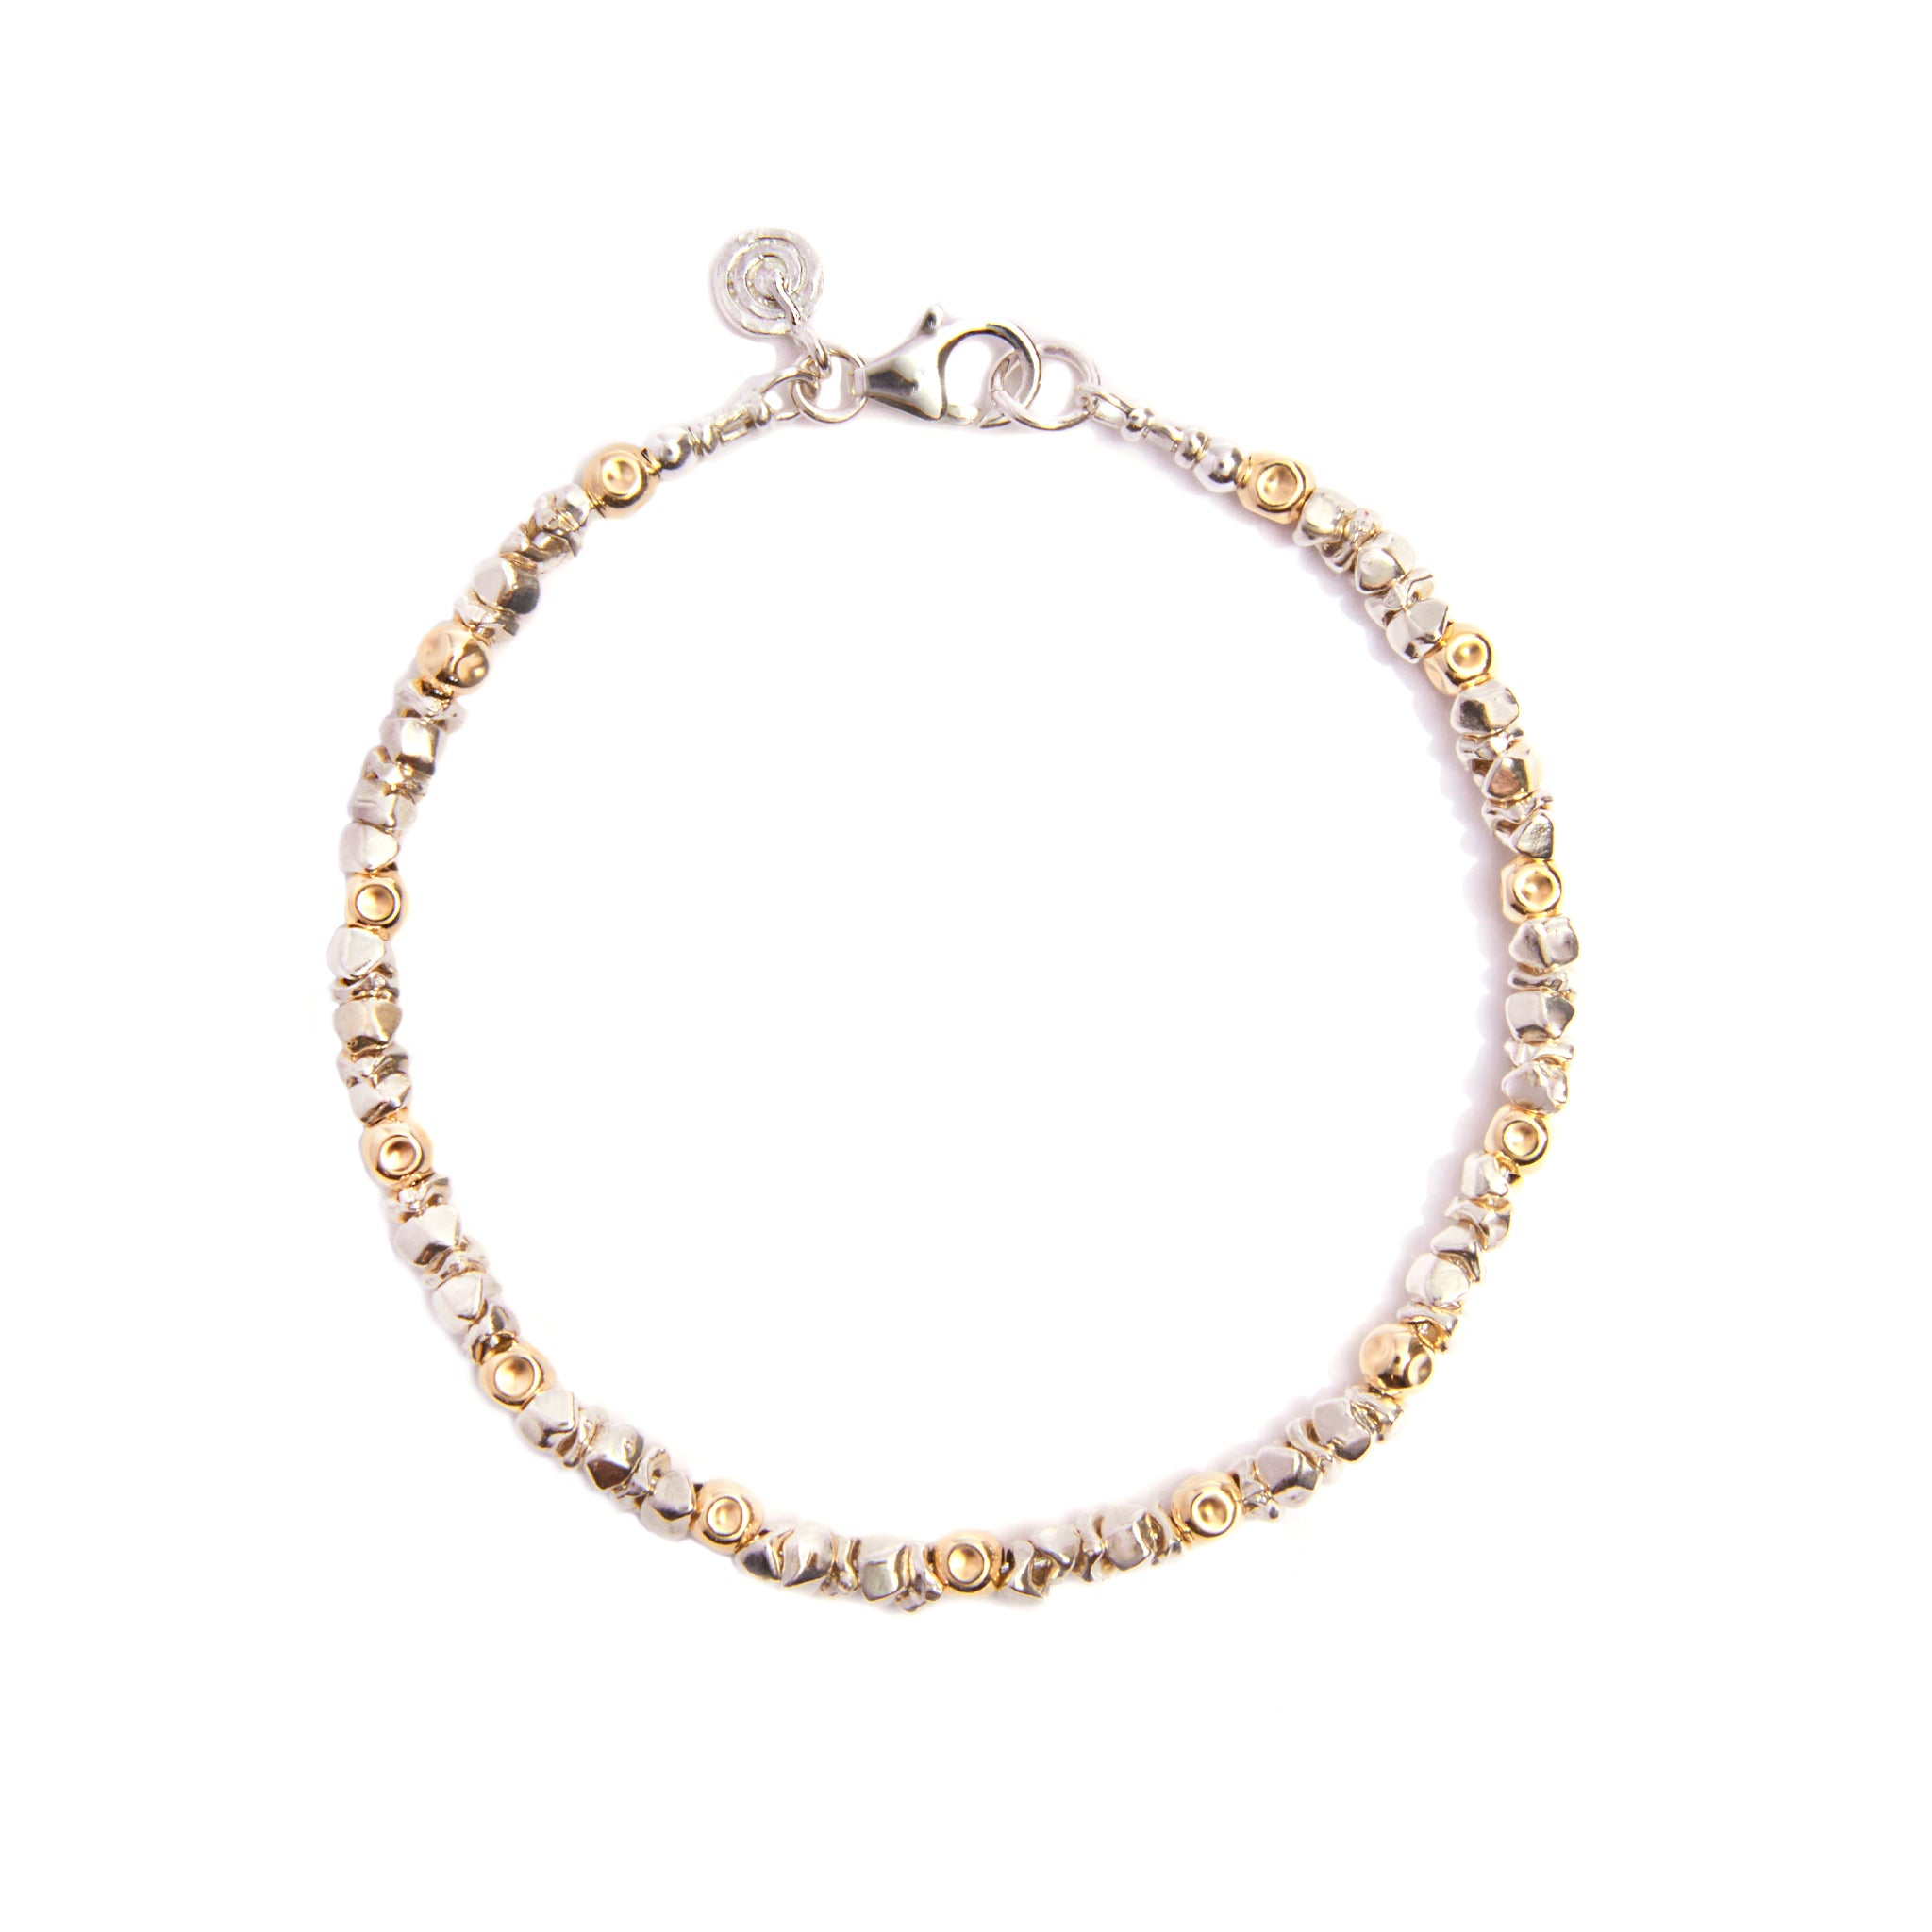 Our "Stellar Sparkle Silver & Gold Bracelet " a captivating blend of sterling silver and radiant gold. With intricate diamond-cut patterns adorning the sterling